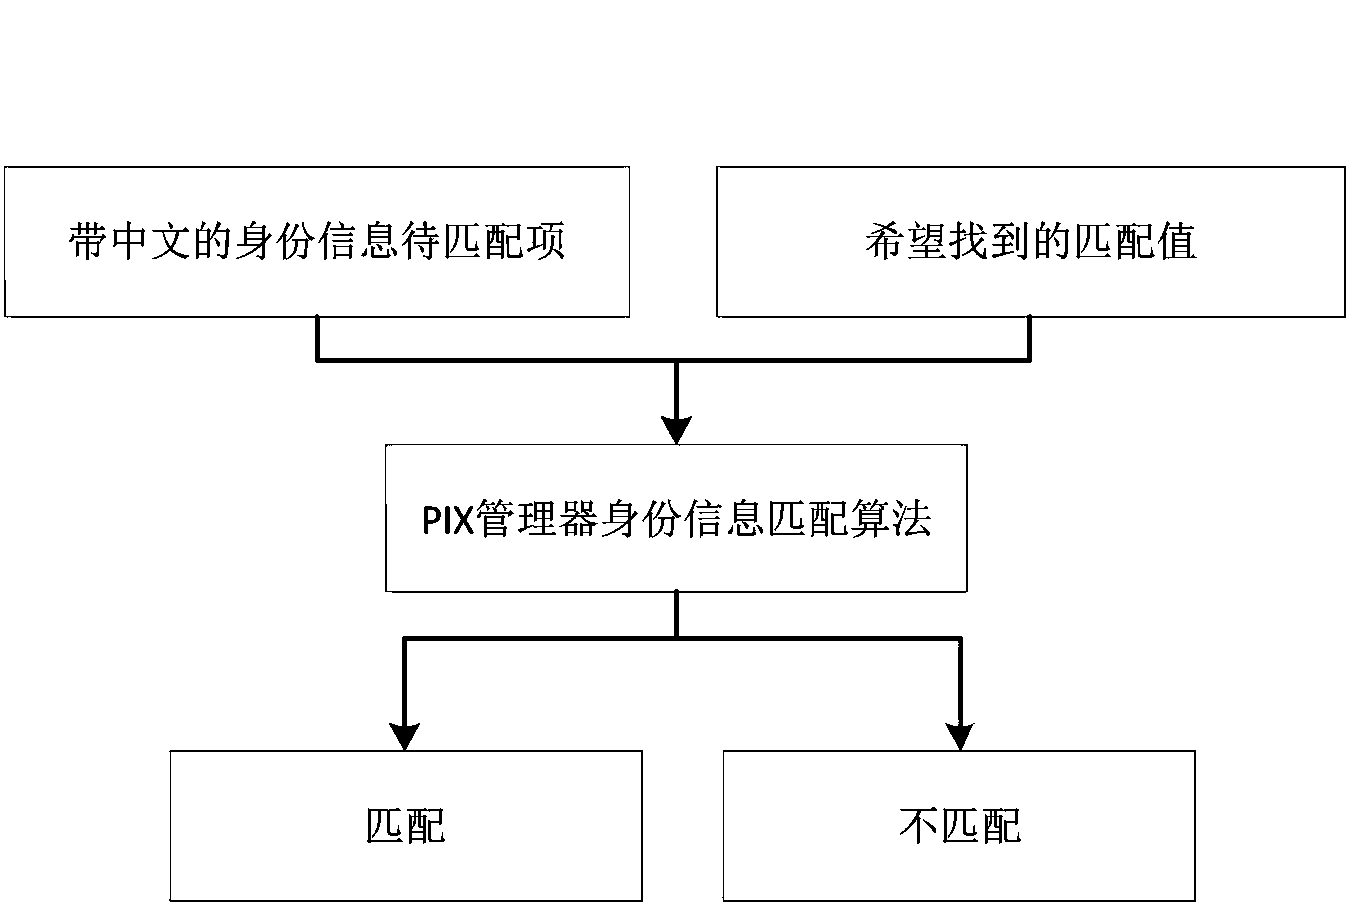 Chinese natural language information matching method based on IHE PIX (Integration Healthcare Enterprise Patient Identifier Cross-referencing) standards